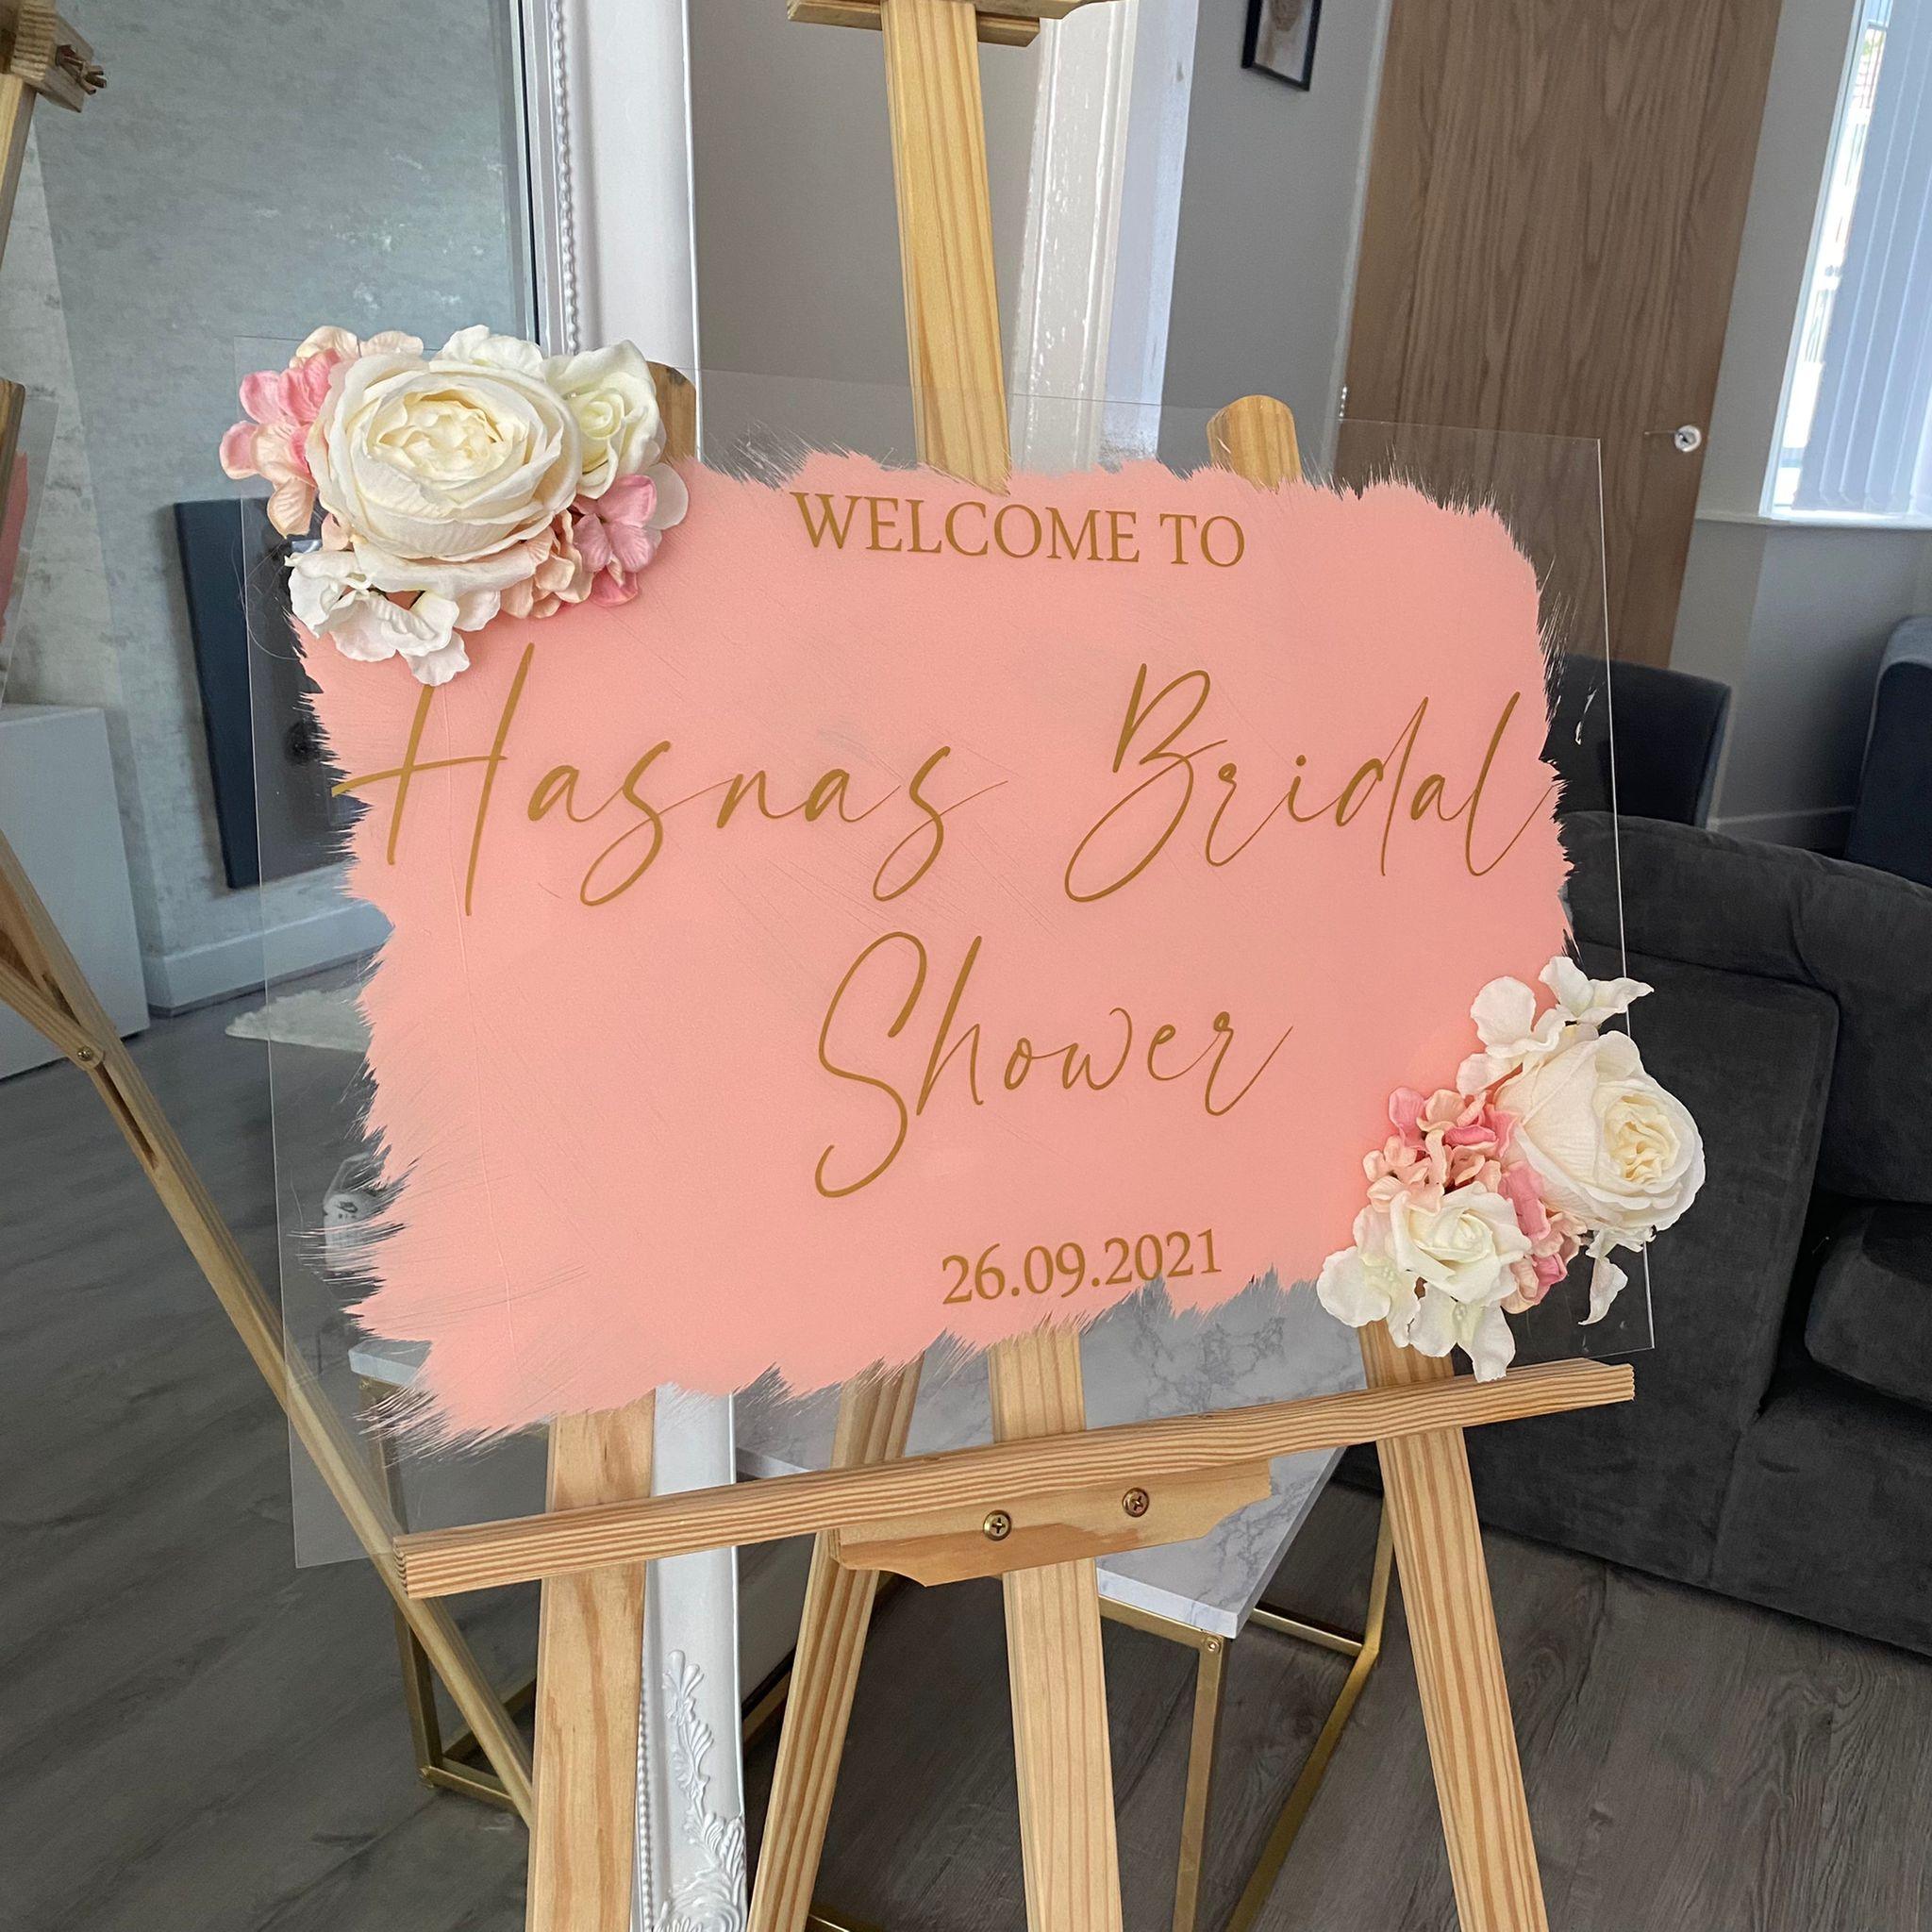 Personalised Acrylic Welcome Bridal Shower Event | Event sign | Party sign | Brushstroke Effect Design 4 - Peaceful Arts